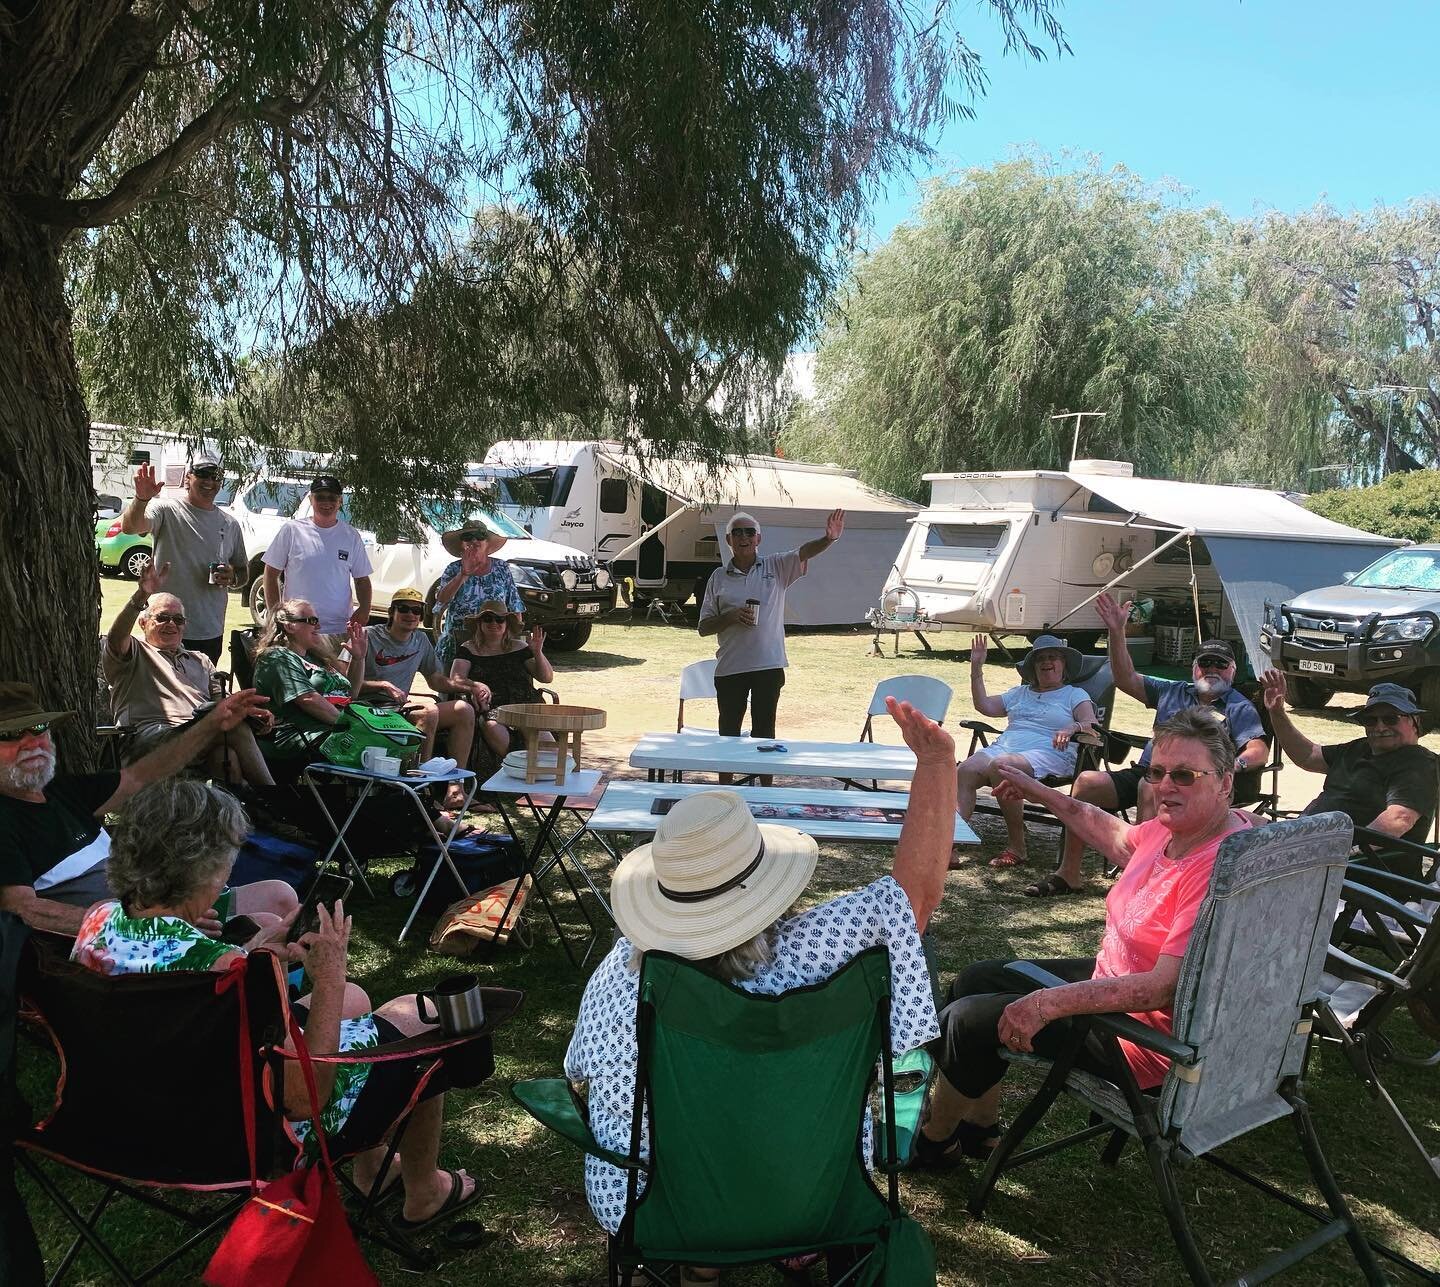 Cee &amp; See recently welcomed back the lovely Jenkins group 😃 Thanks for staying with us and we look forward to seeing you all again next year 🍻🏖️
 
#ceeandsee #funtimes #rediscoverockingham #rockingham #seeperth #caravanandcampingwa #letsgocara